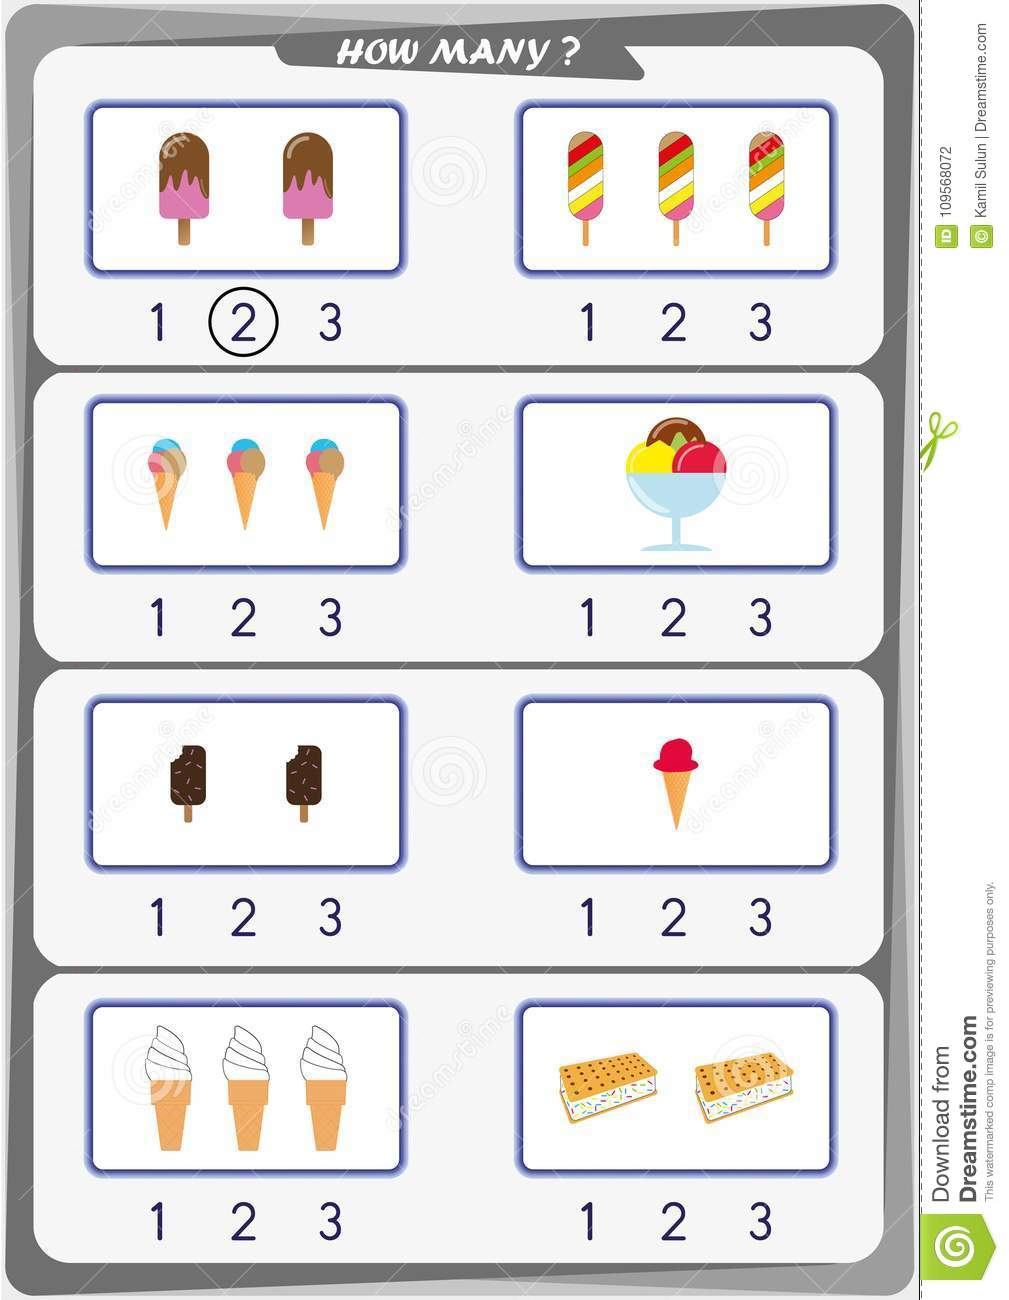 Worksheet For Kids Count The Number Of Objects Learn The Numbers 1 2